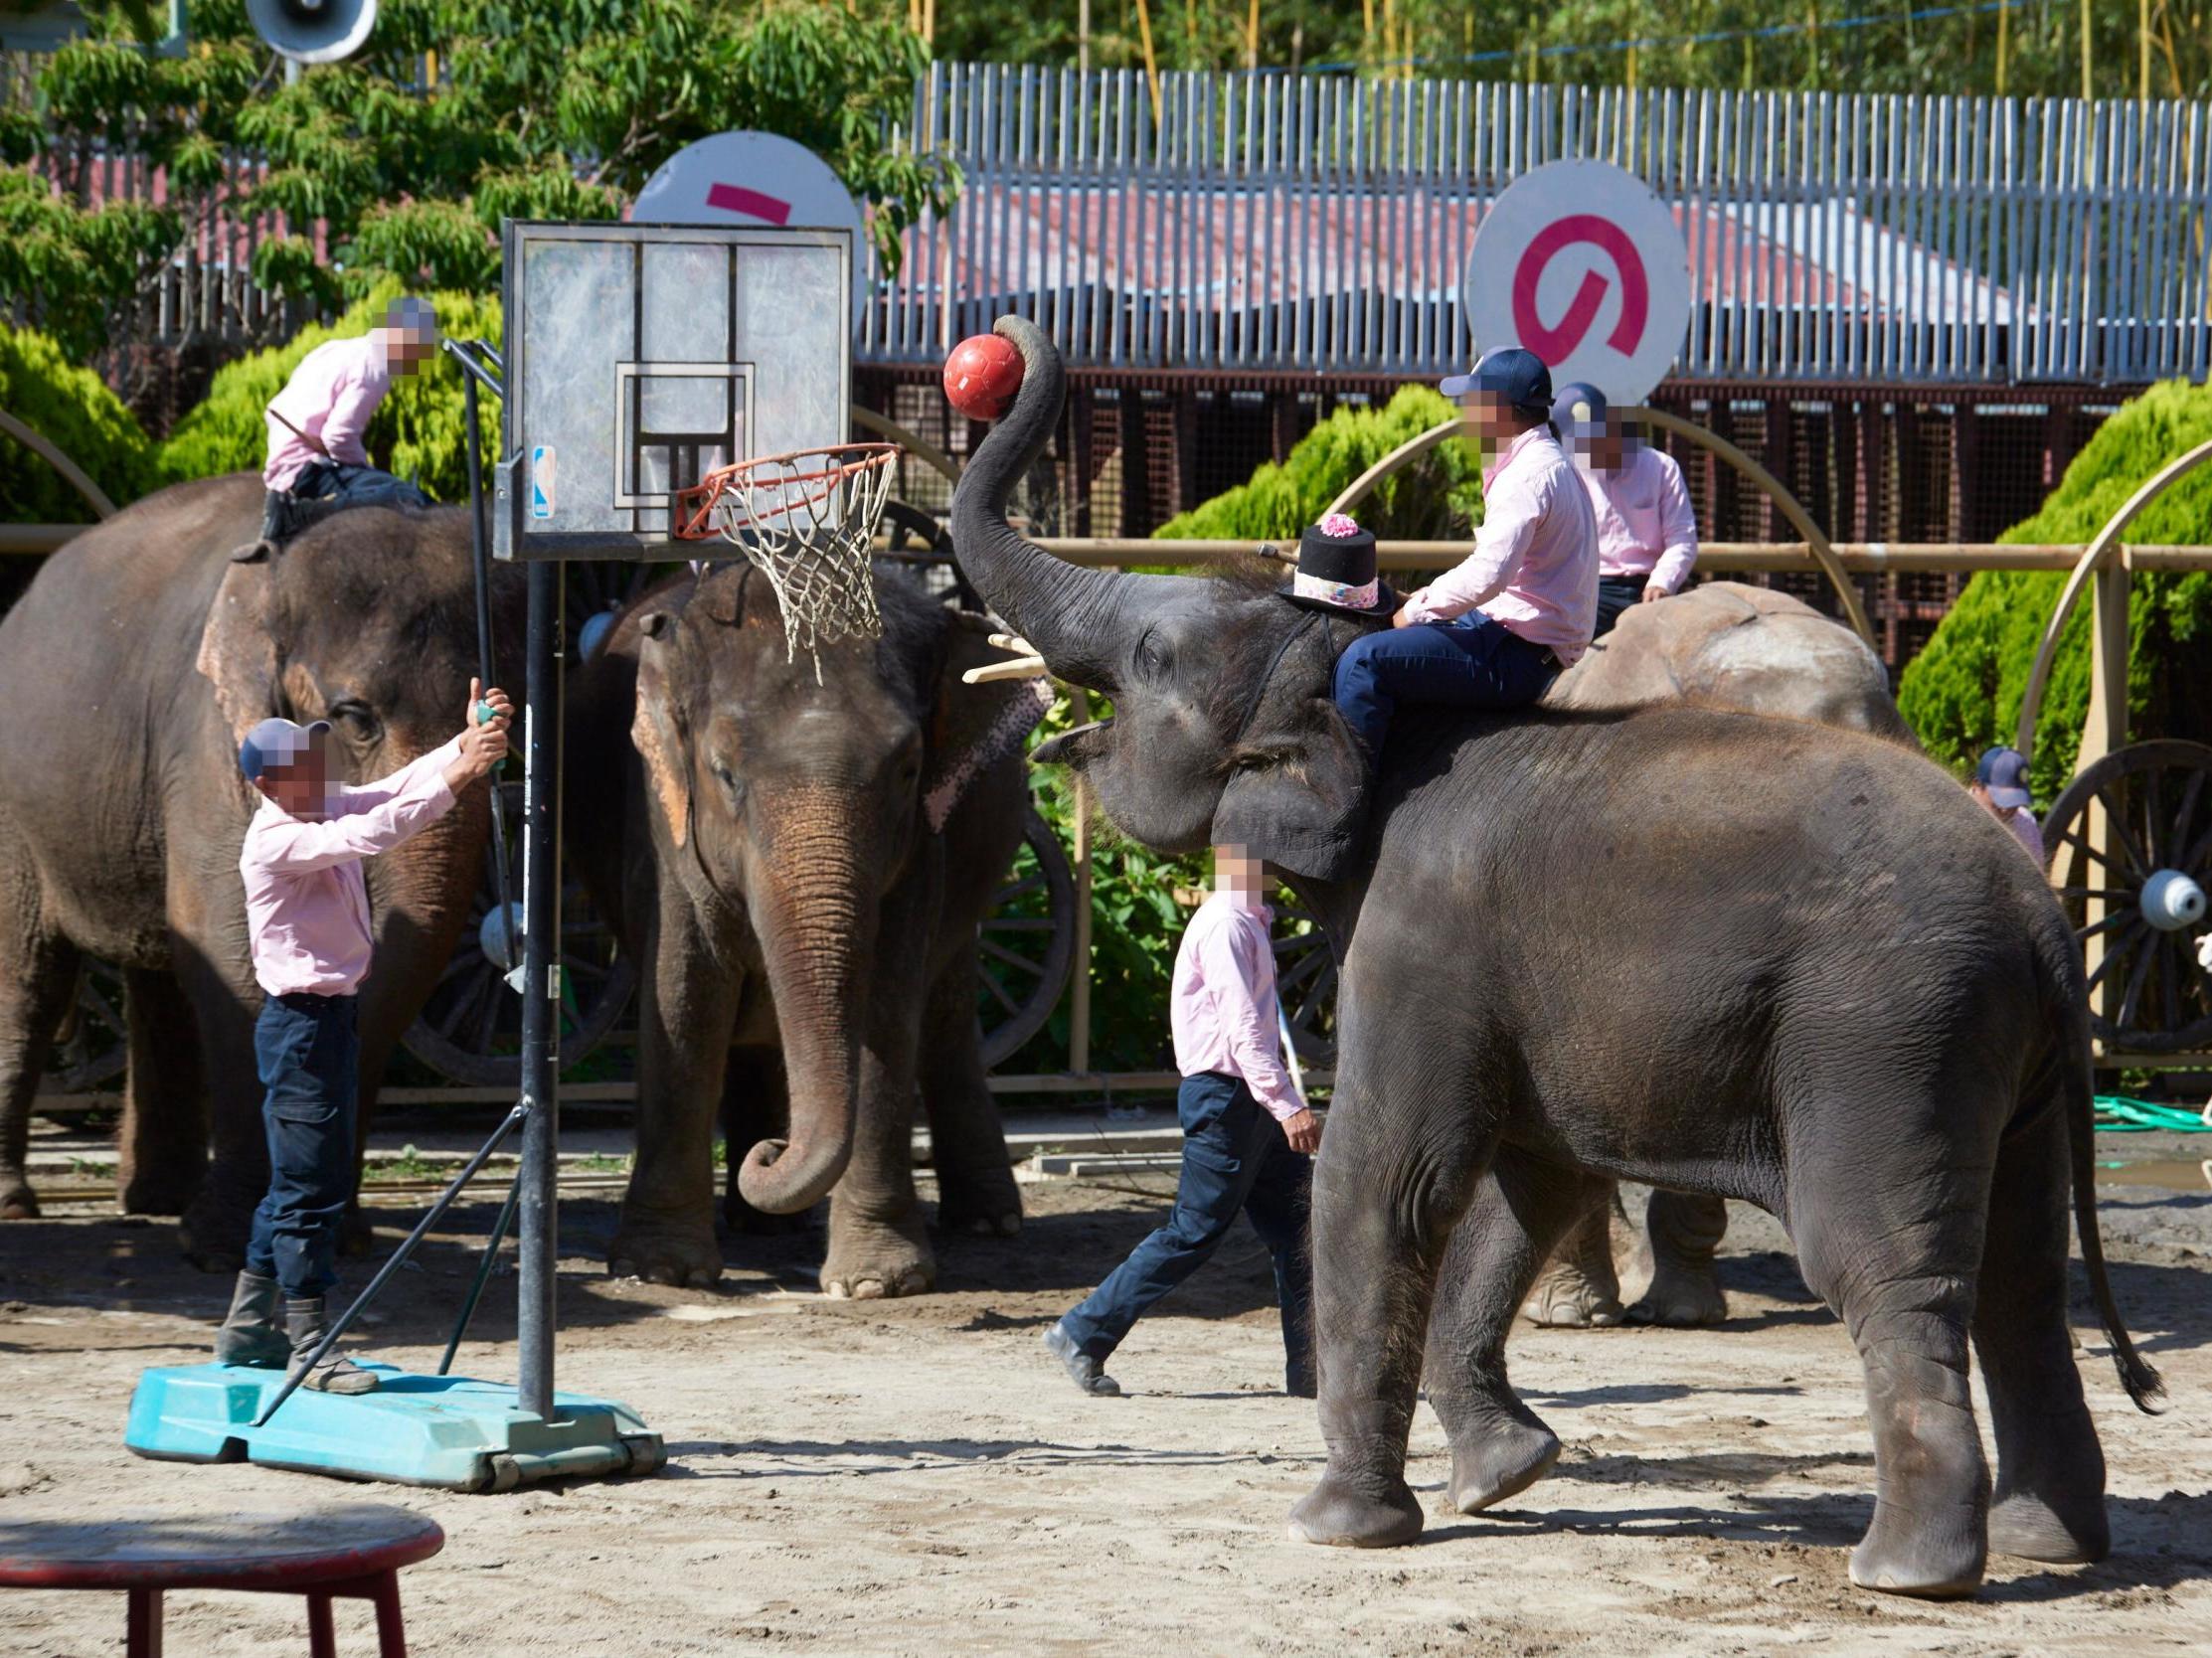 Research involved visits to a dozen of zoos where animals were maltreated. Pictured are elephants forced to play basketball